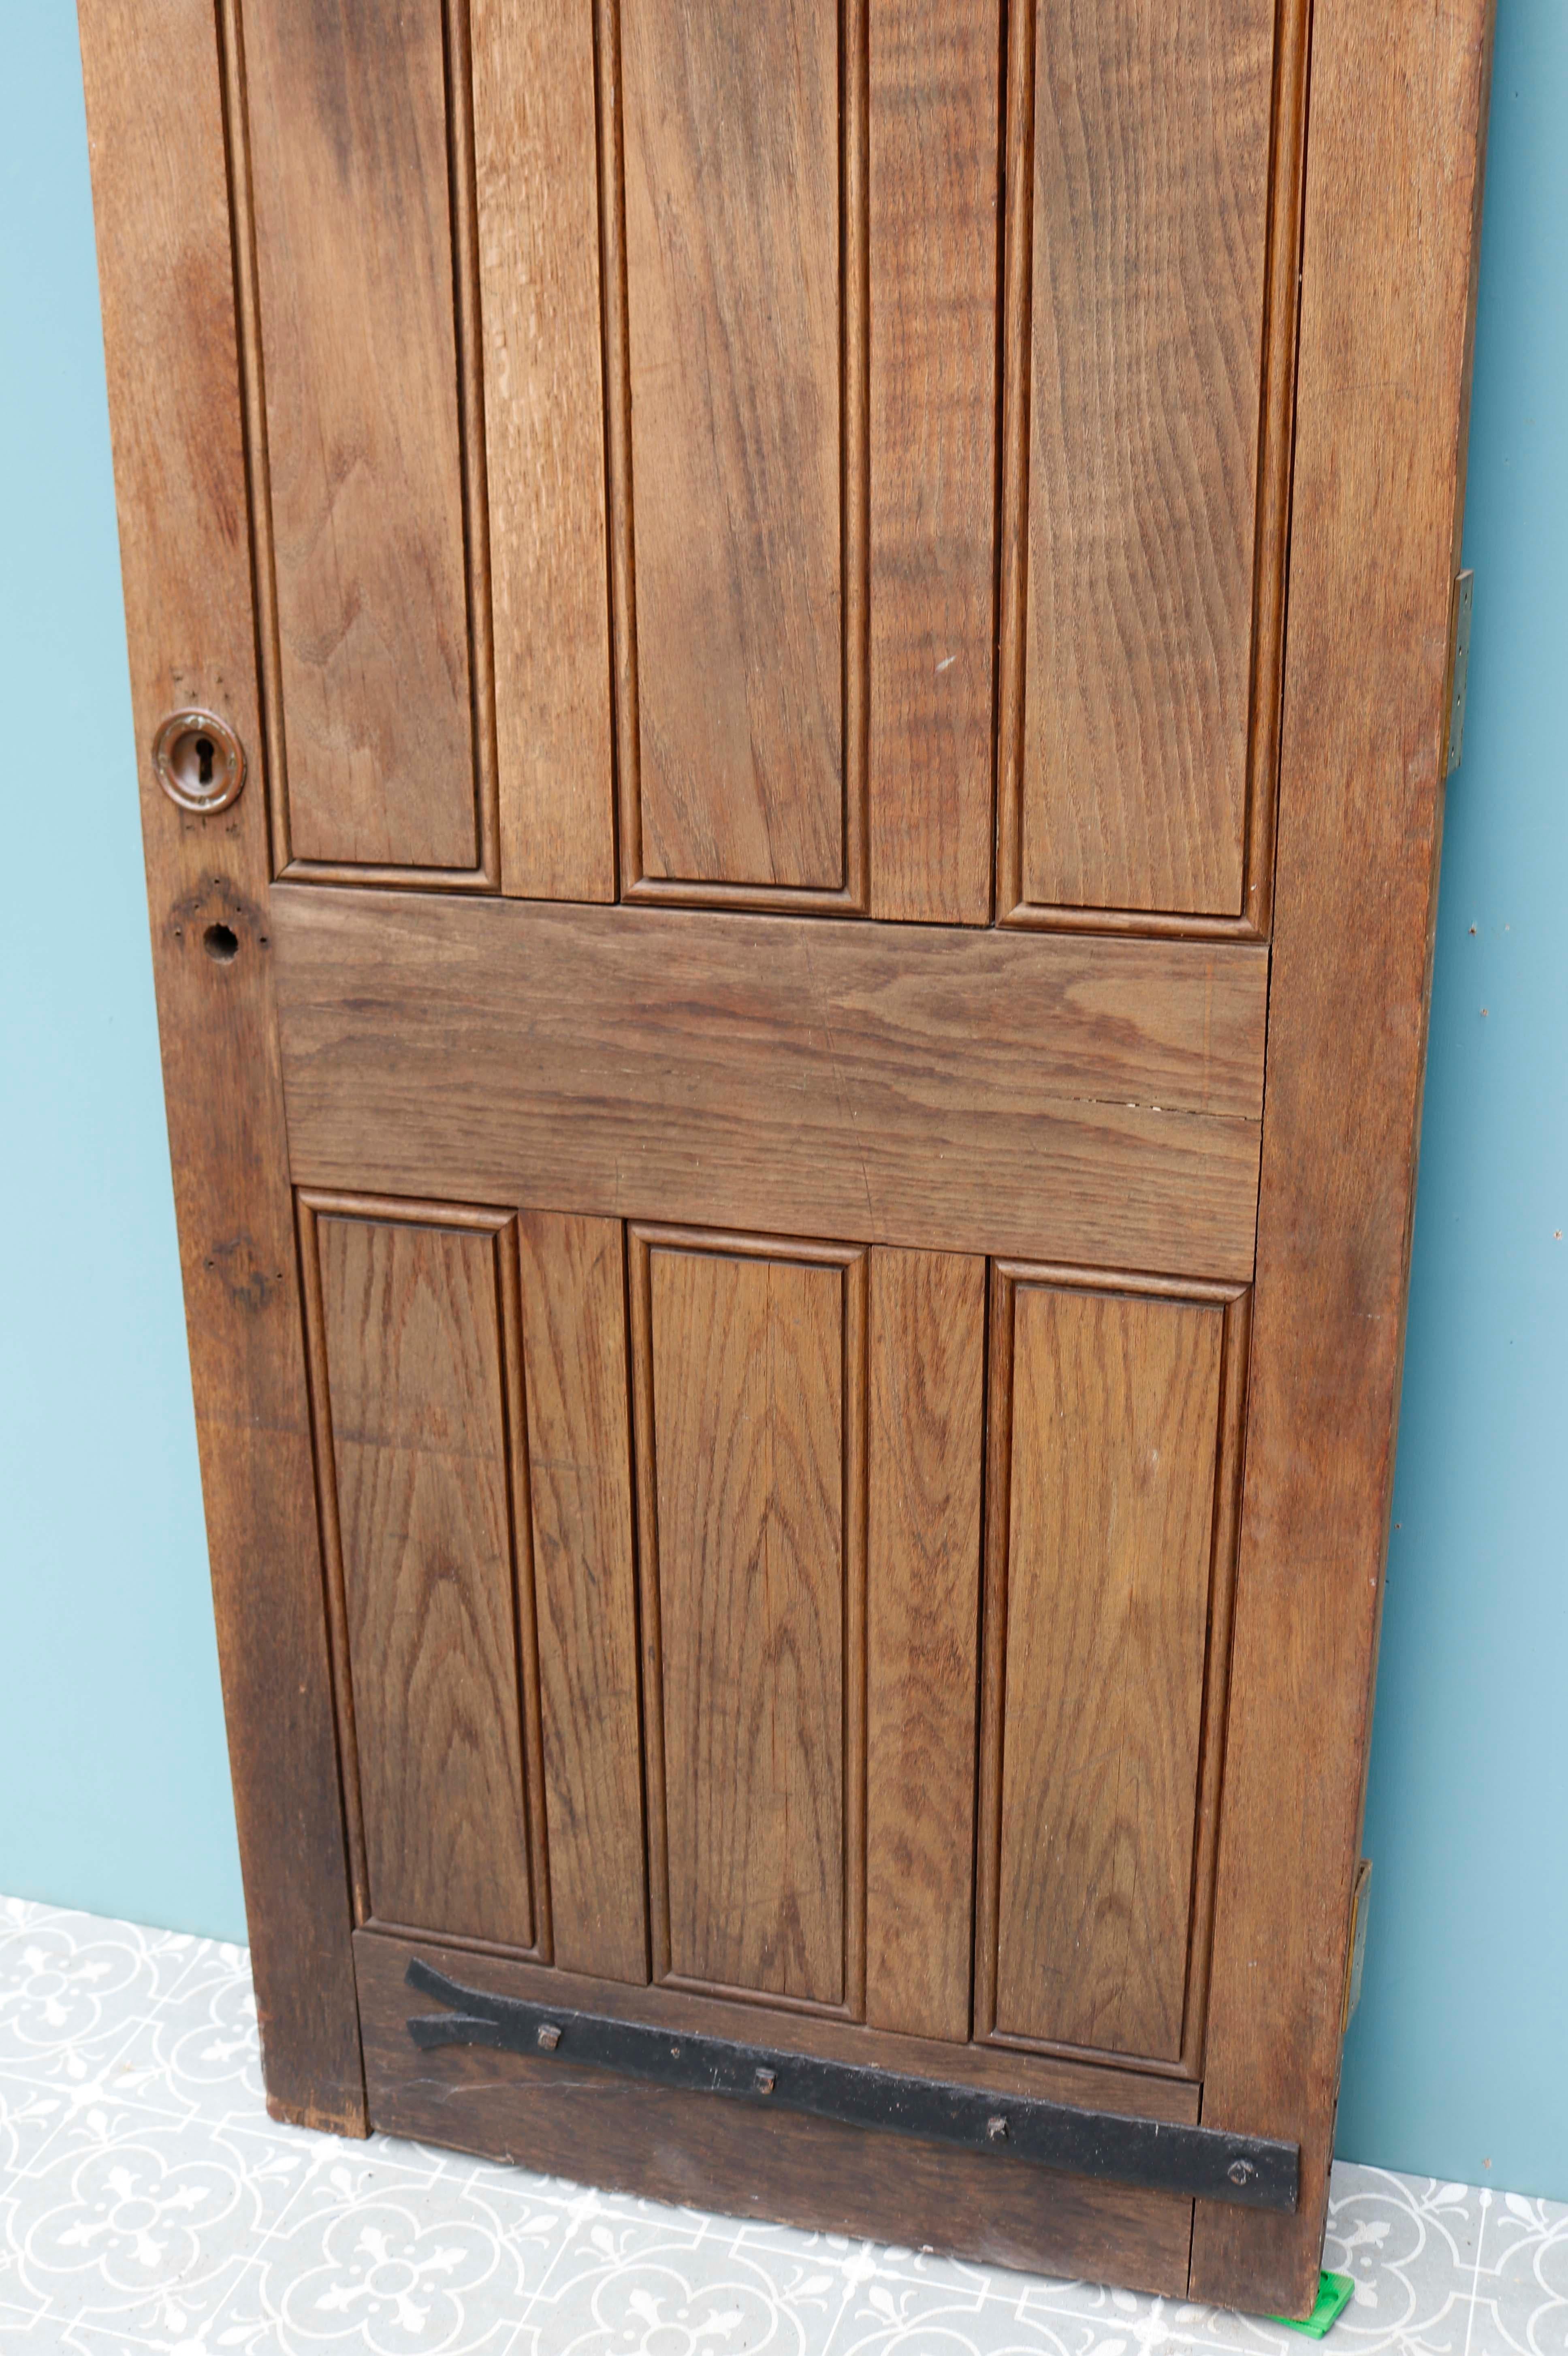 Reclaimed 1930’s Oak Exterior Door. An early 20th century solid oak door. With minimal but effective carving and wrought iron detailing this heavy duty exterior door provides style as well as functionality.